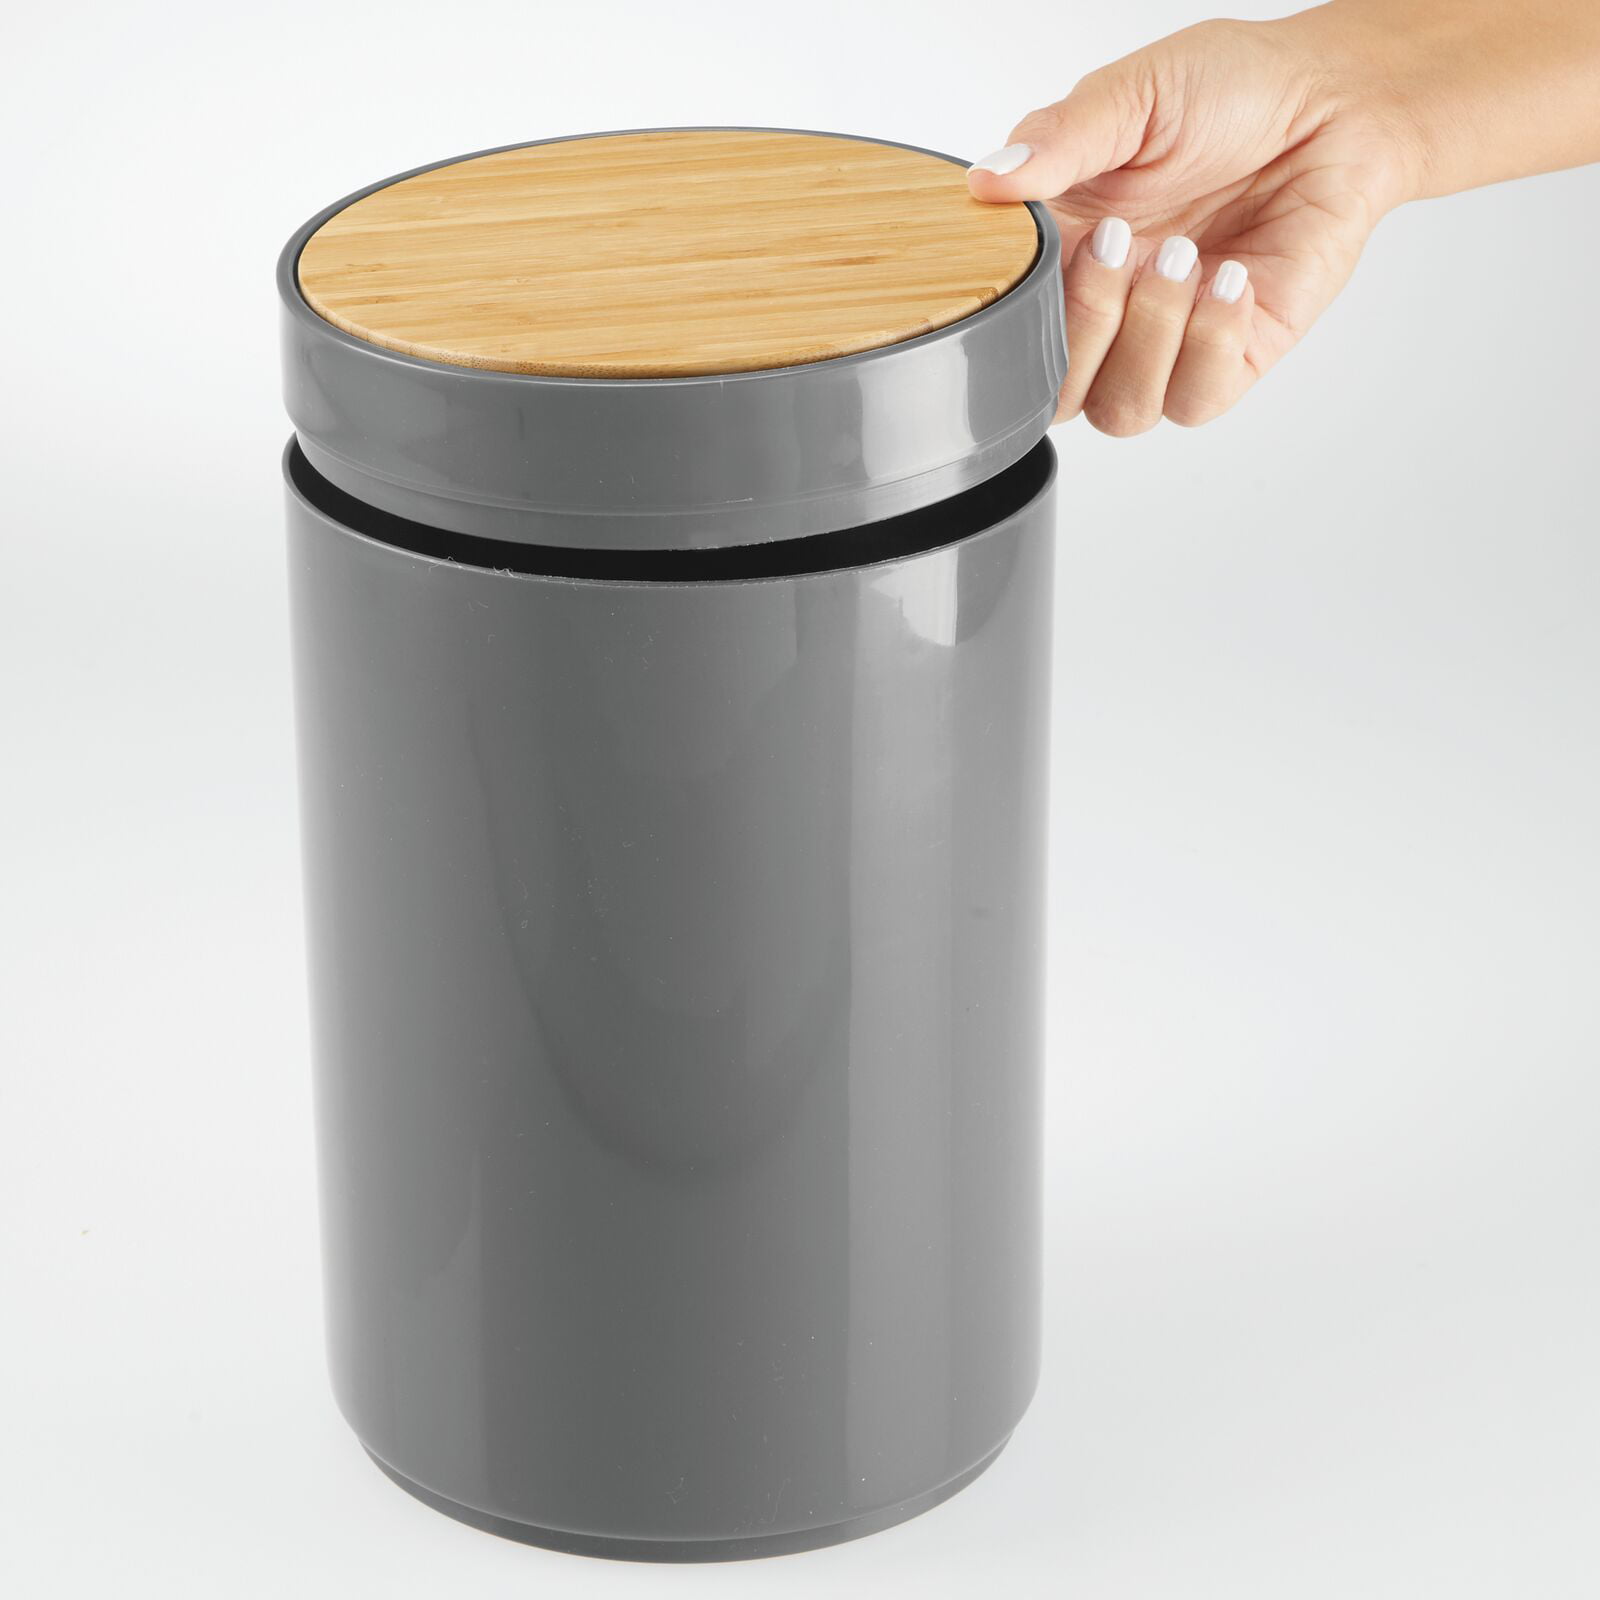 Home Offices Garbage Container Bin with Bamboo Swing Top Lid 1.3 Gallon/5 Liter Kitchens for Bathrooms mDesign Small Round Plastic Trash Can Wastebasket Mint/Natural Wood Finish 